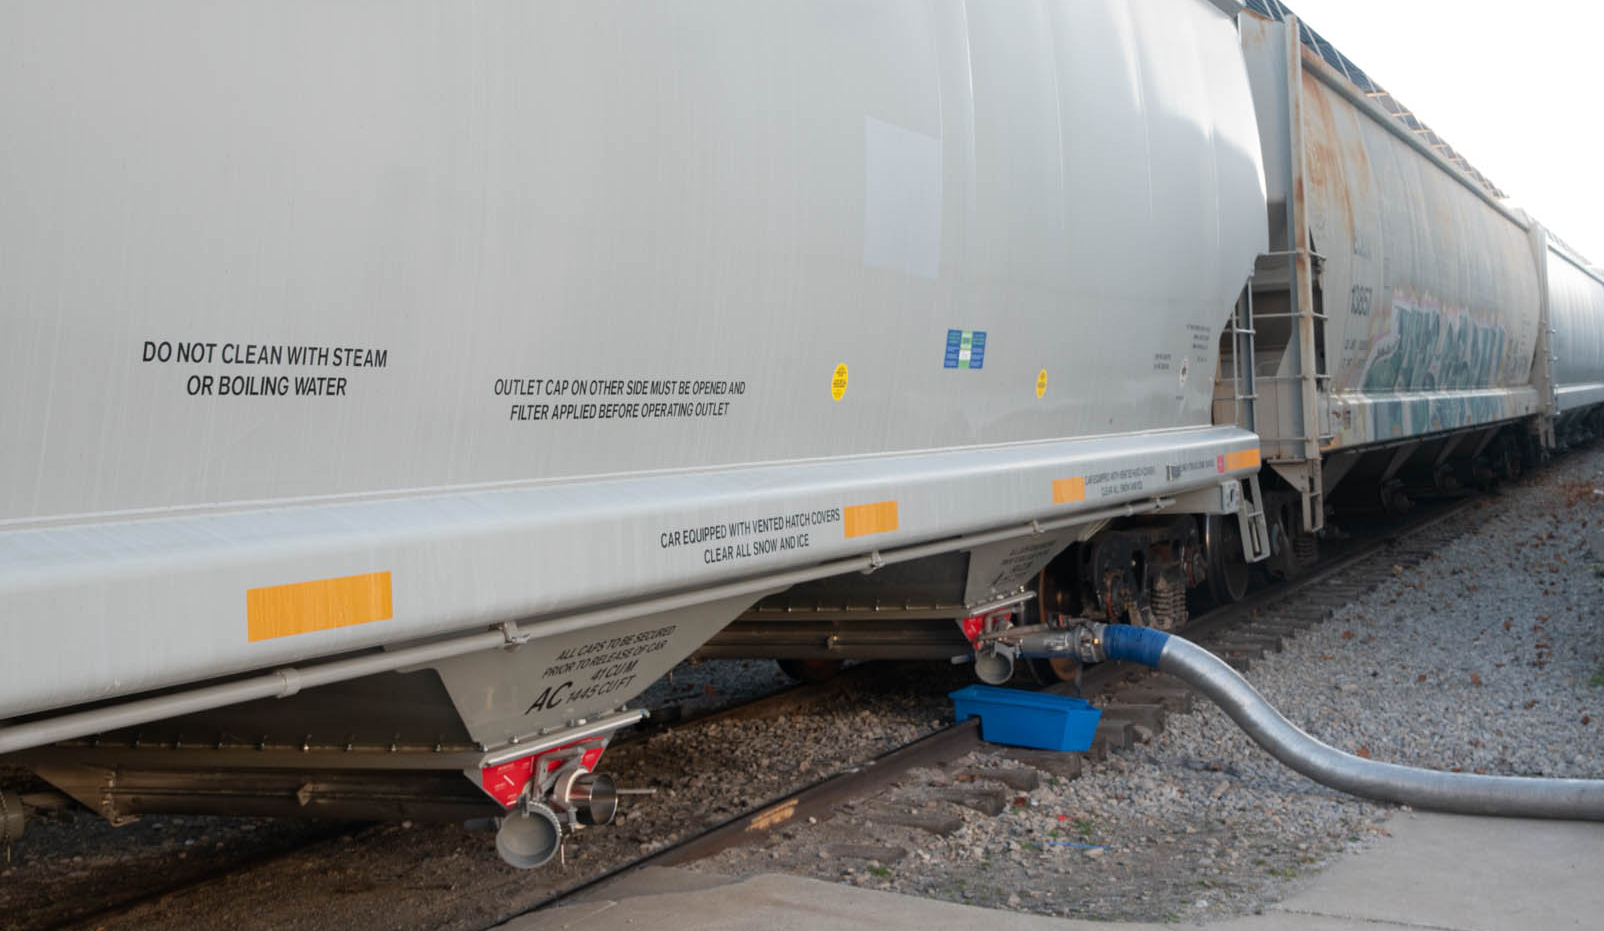 Polymer is being transloaded from this hopper car at ASW Global.